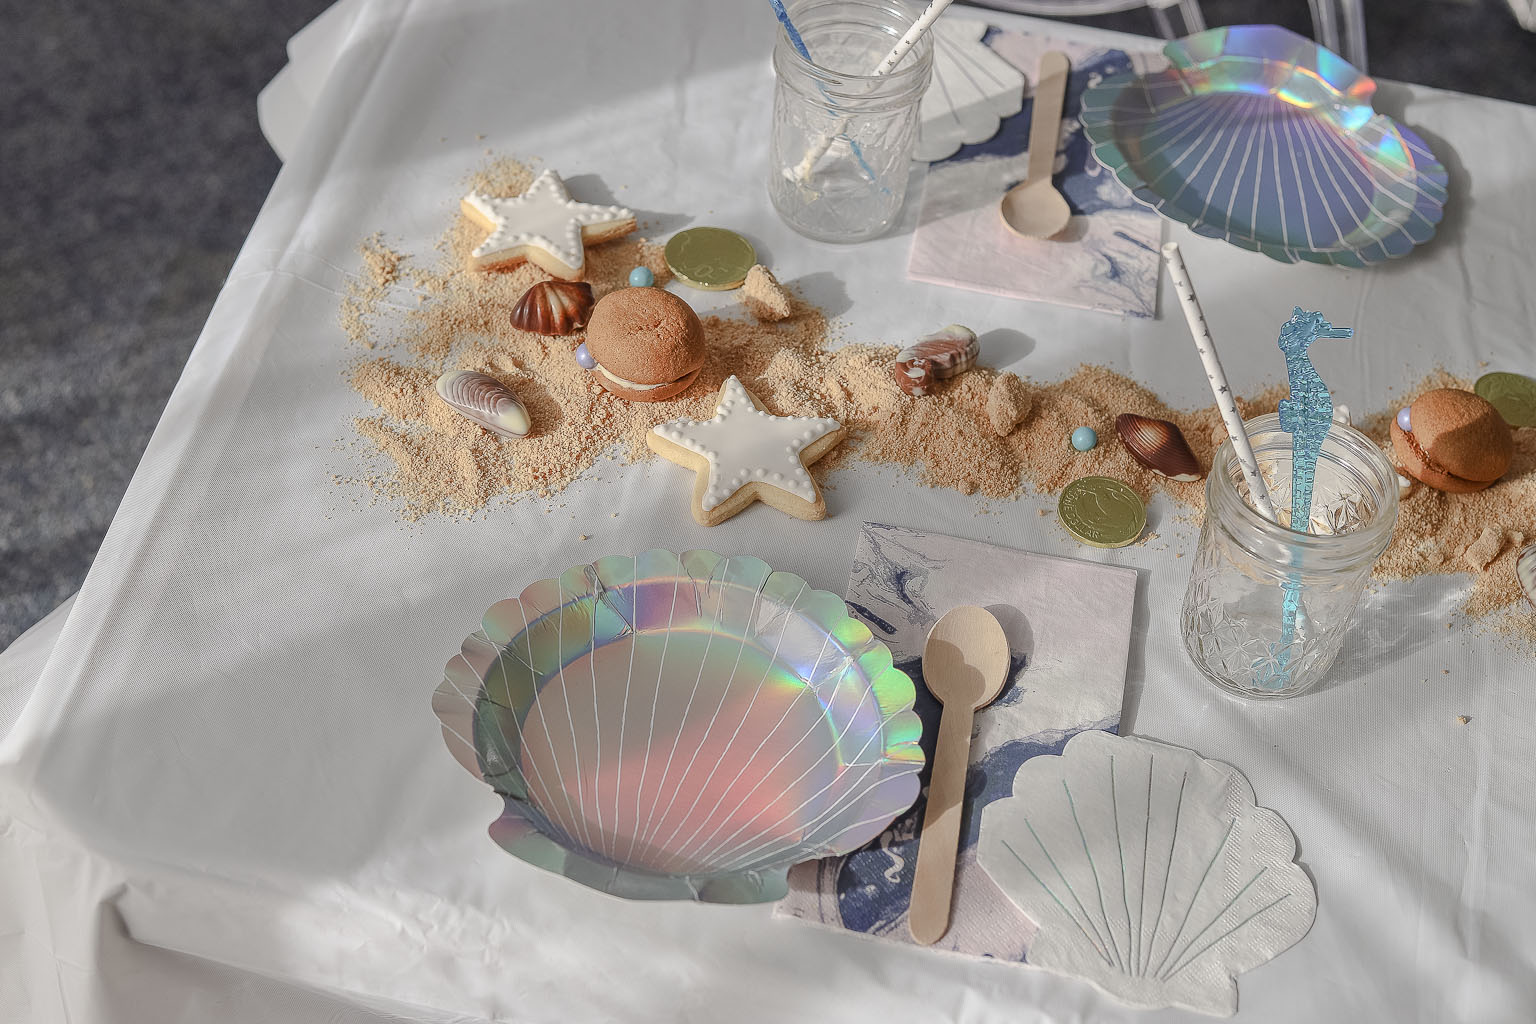 The Style Aesthetic | How to Style a Childrens Party Table | Cocos Under the Sea Party